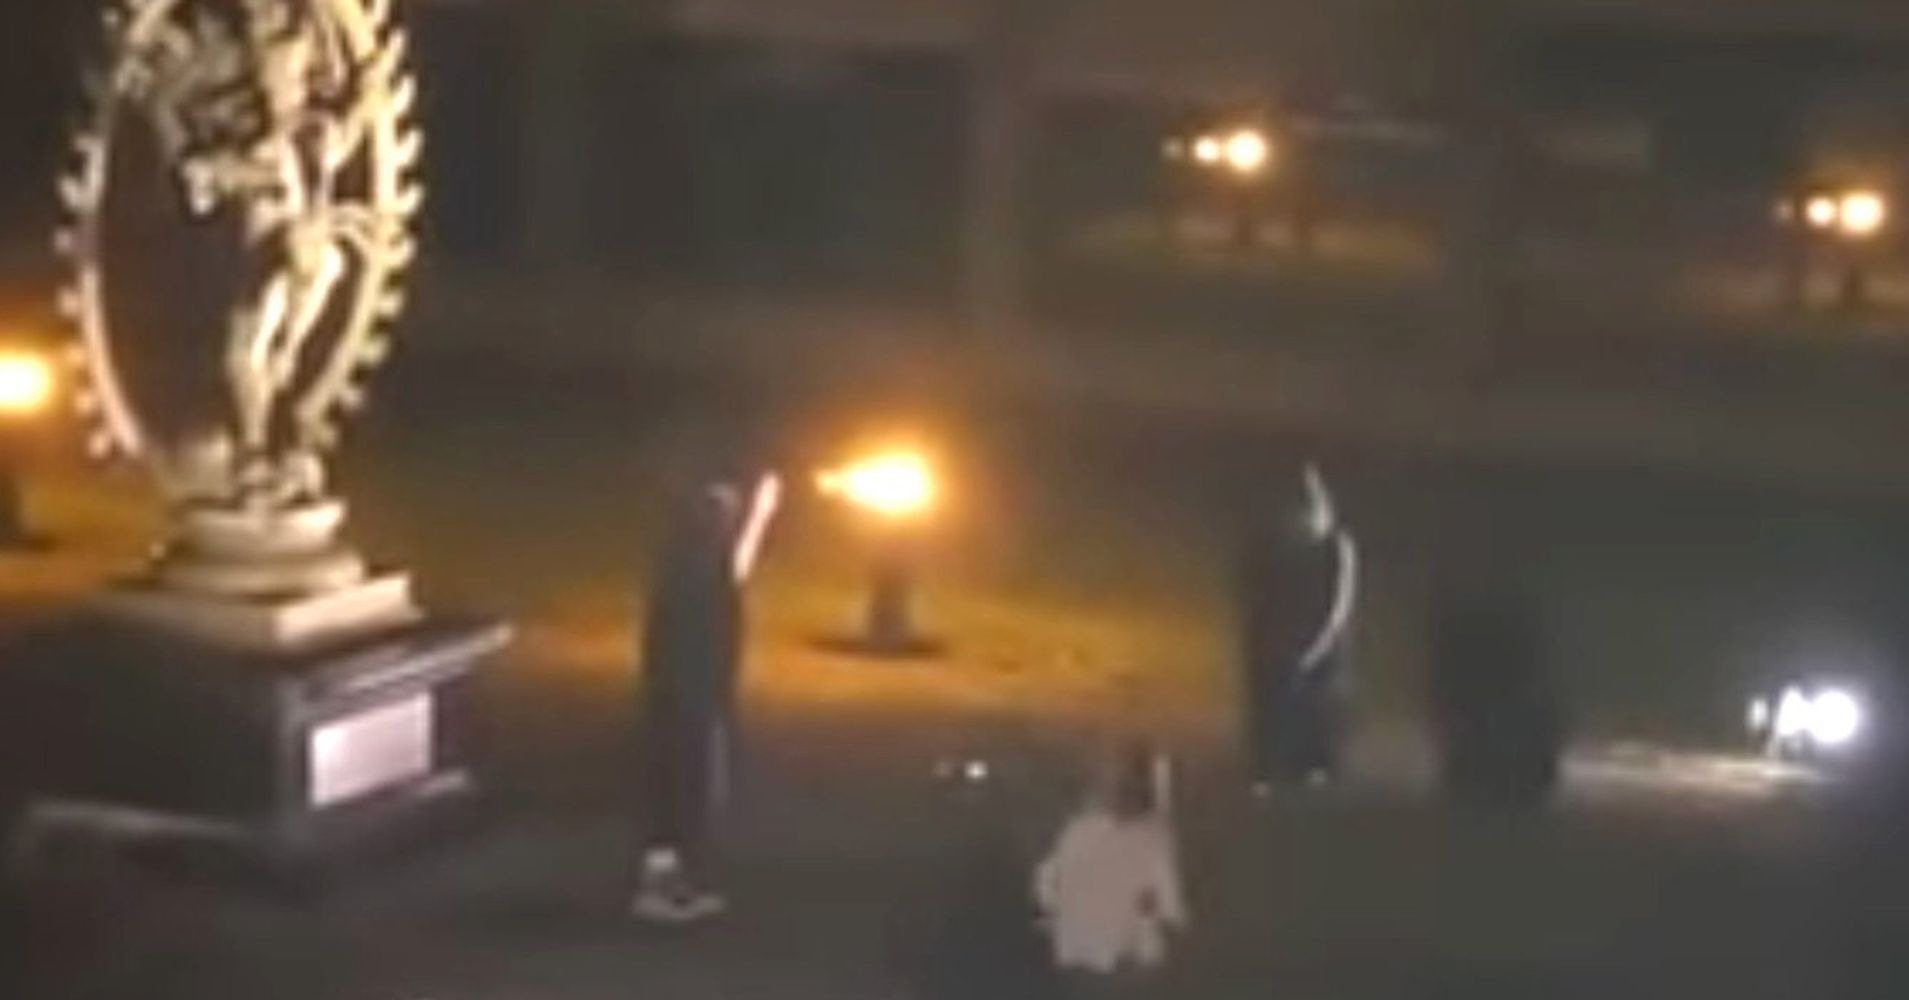 Video Of Satanic Ritual At Worlds Most Famous Physics Lab Is A Hoax